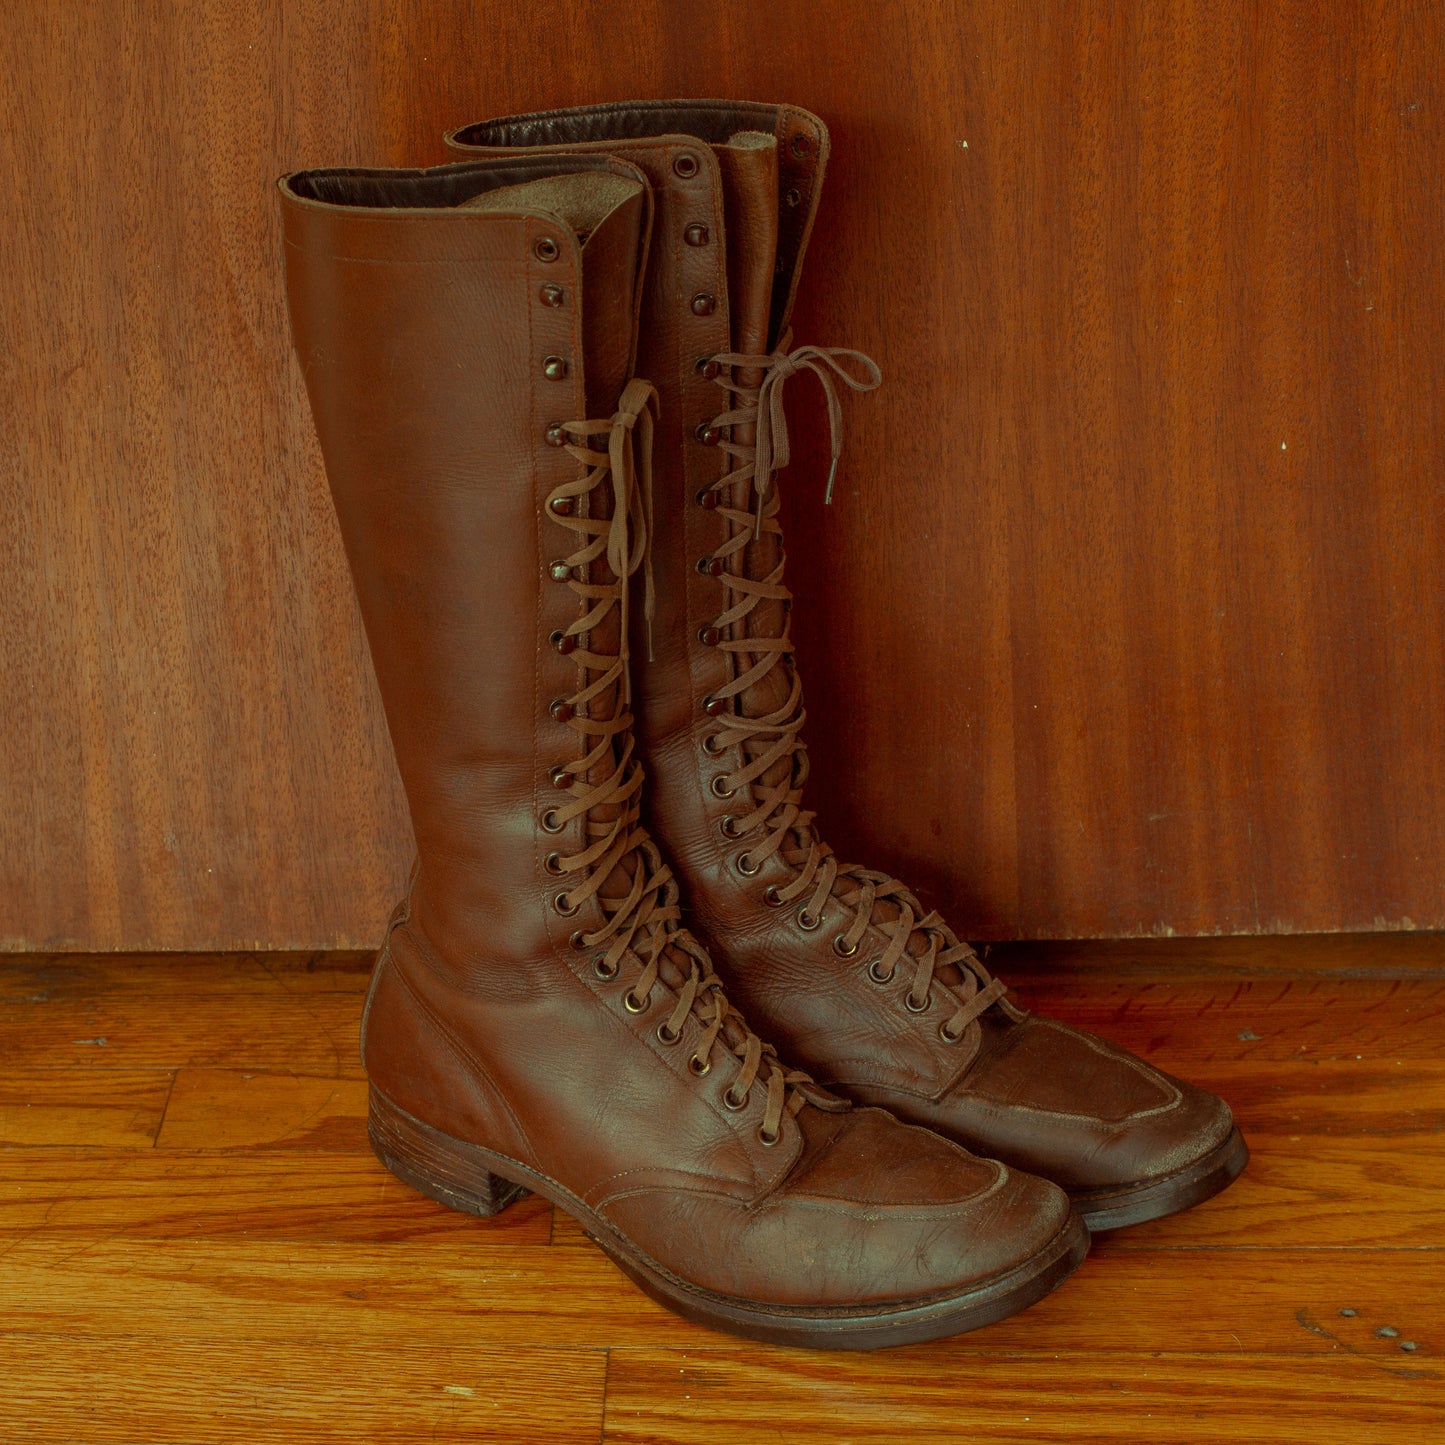 Vintage 1930s Lace Up Knee High Leather Boots